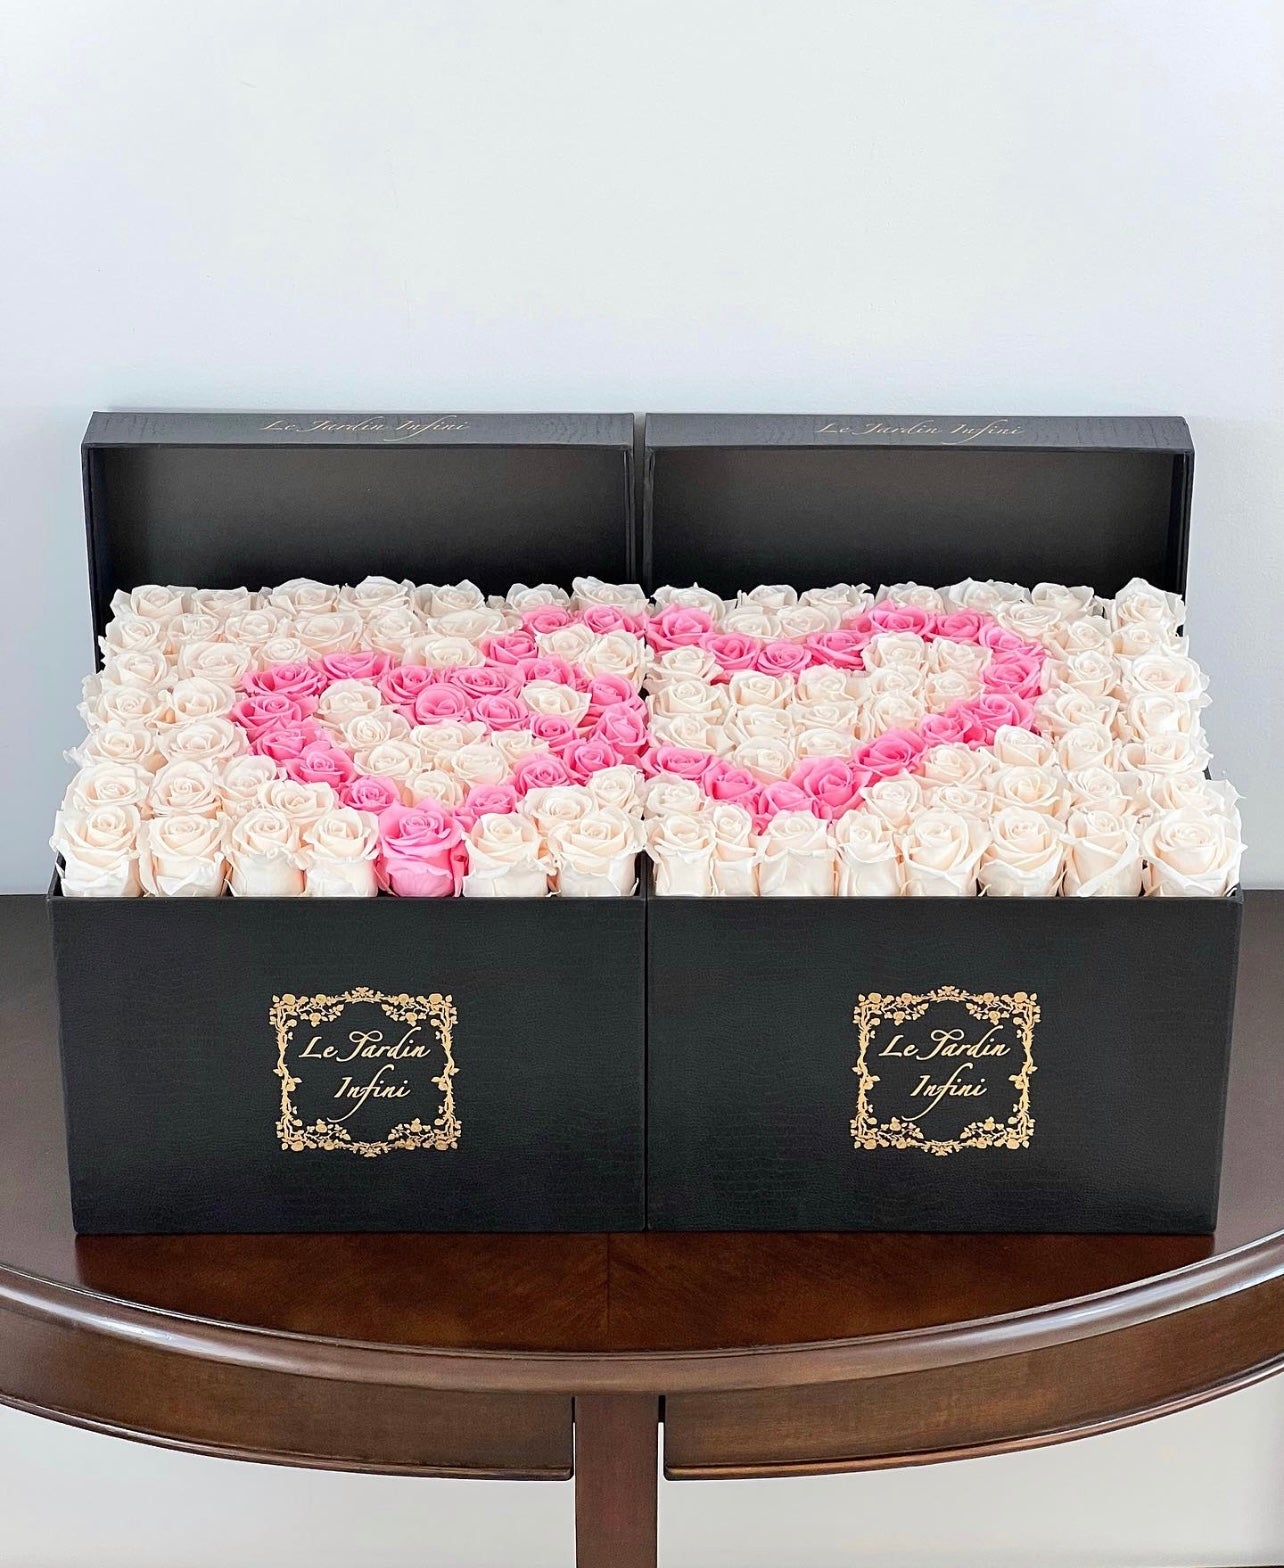 100 Roses Champagne & Pink Hearts Design Preserved Roses - 2 Large Square Luxury Black Leather Boxes